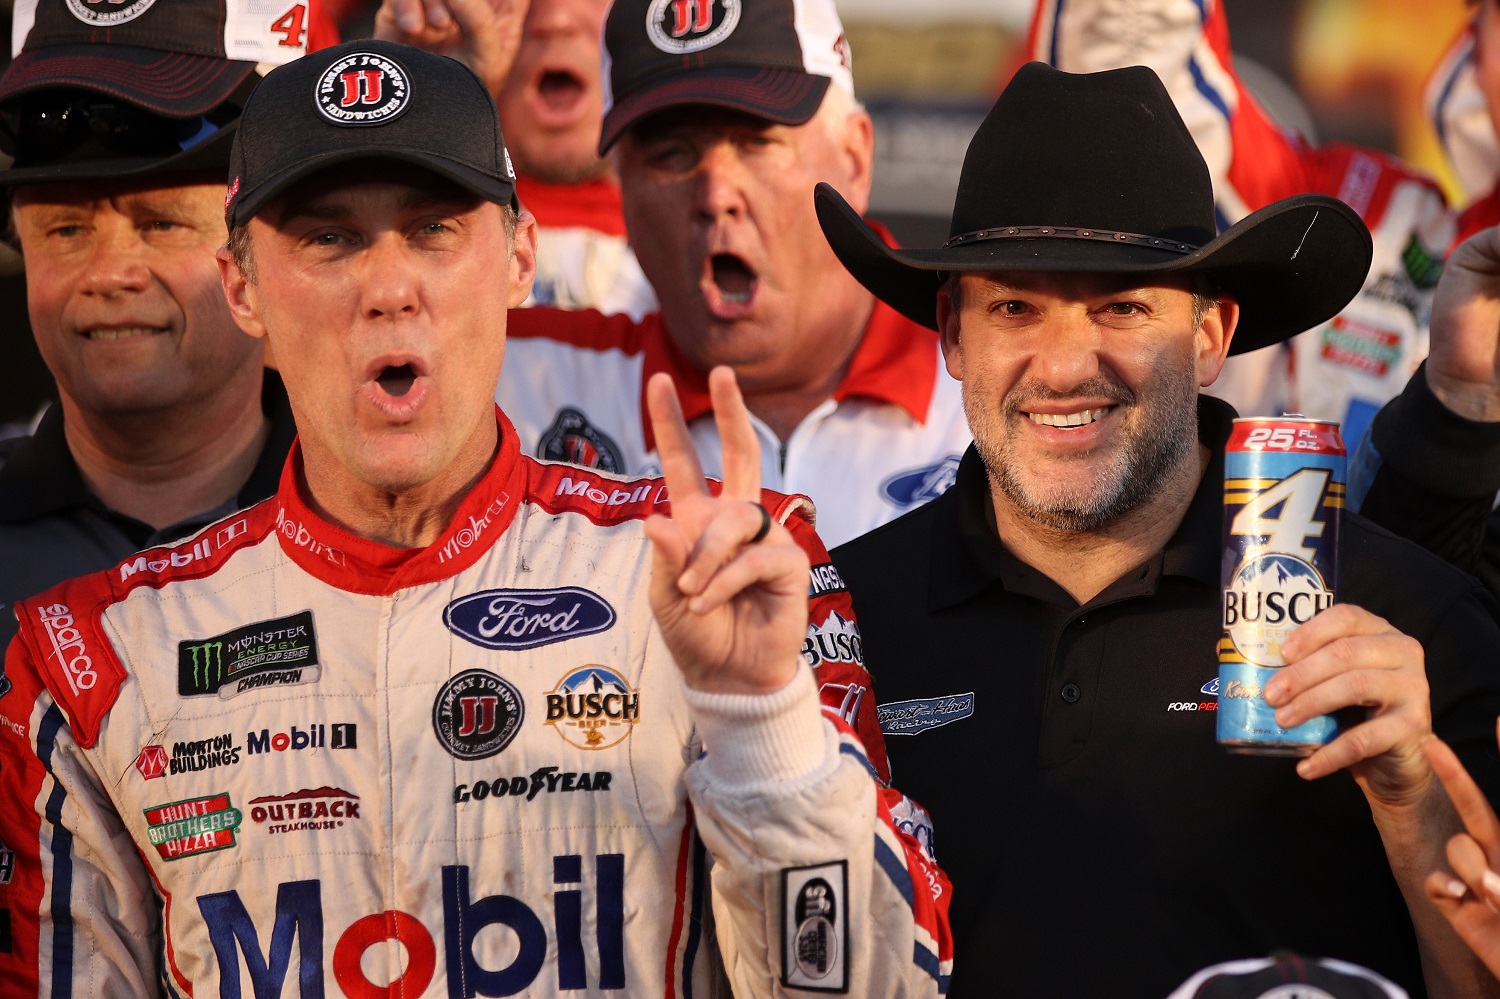 Kevin Harvick and Tony Stewart celebrate in Victory Lane after Harvick won the AAA Texas 500 at Texas Motor Speedway on Nov. 5, 2017. | Chris Graythen/Getty Images